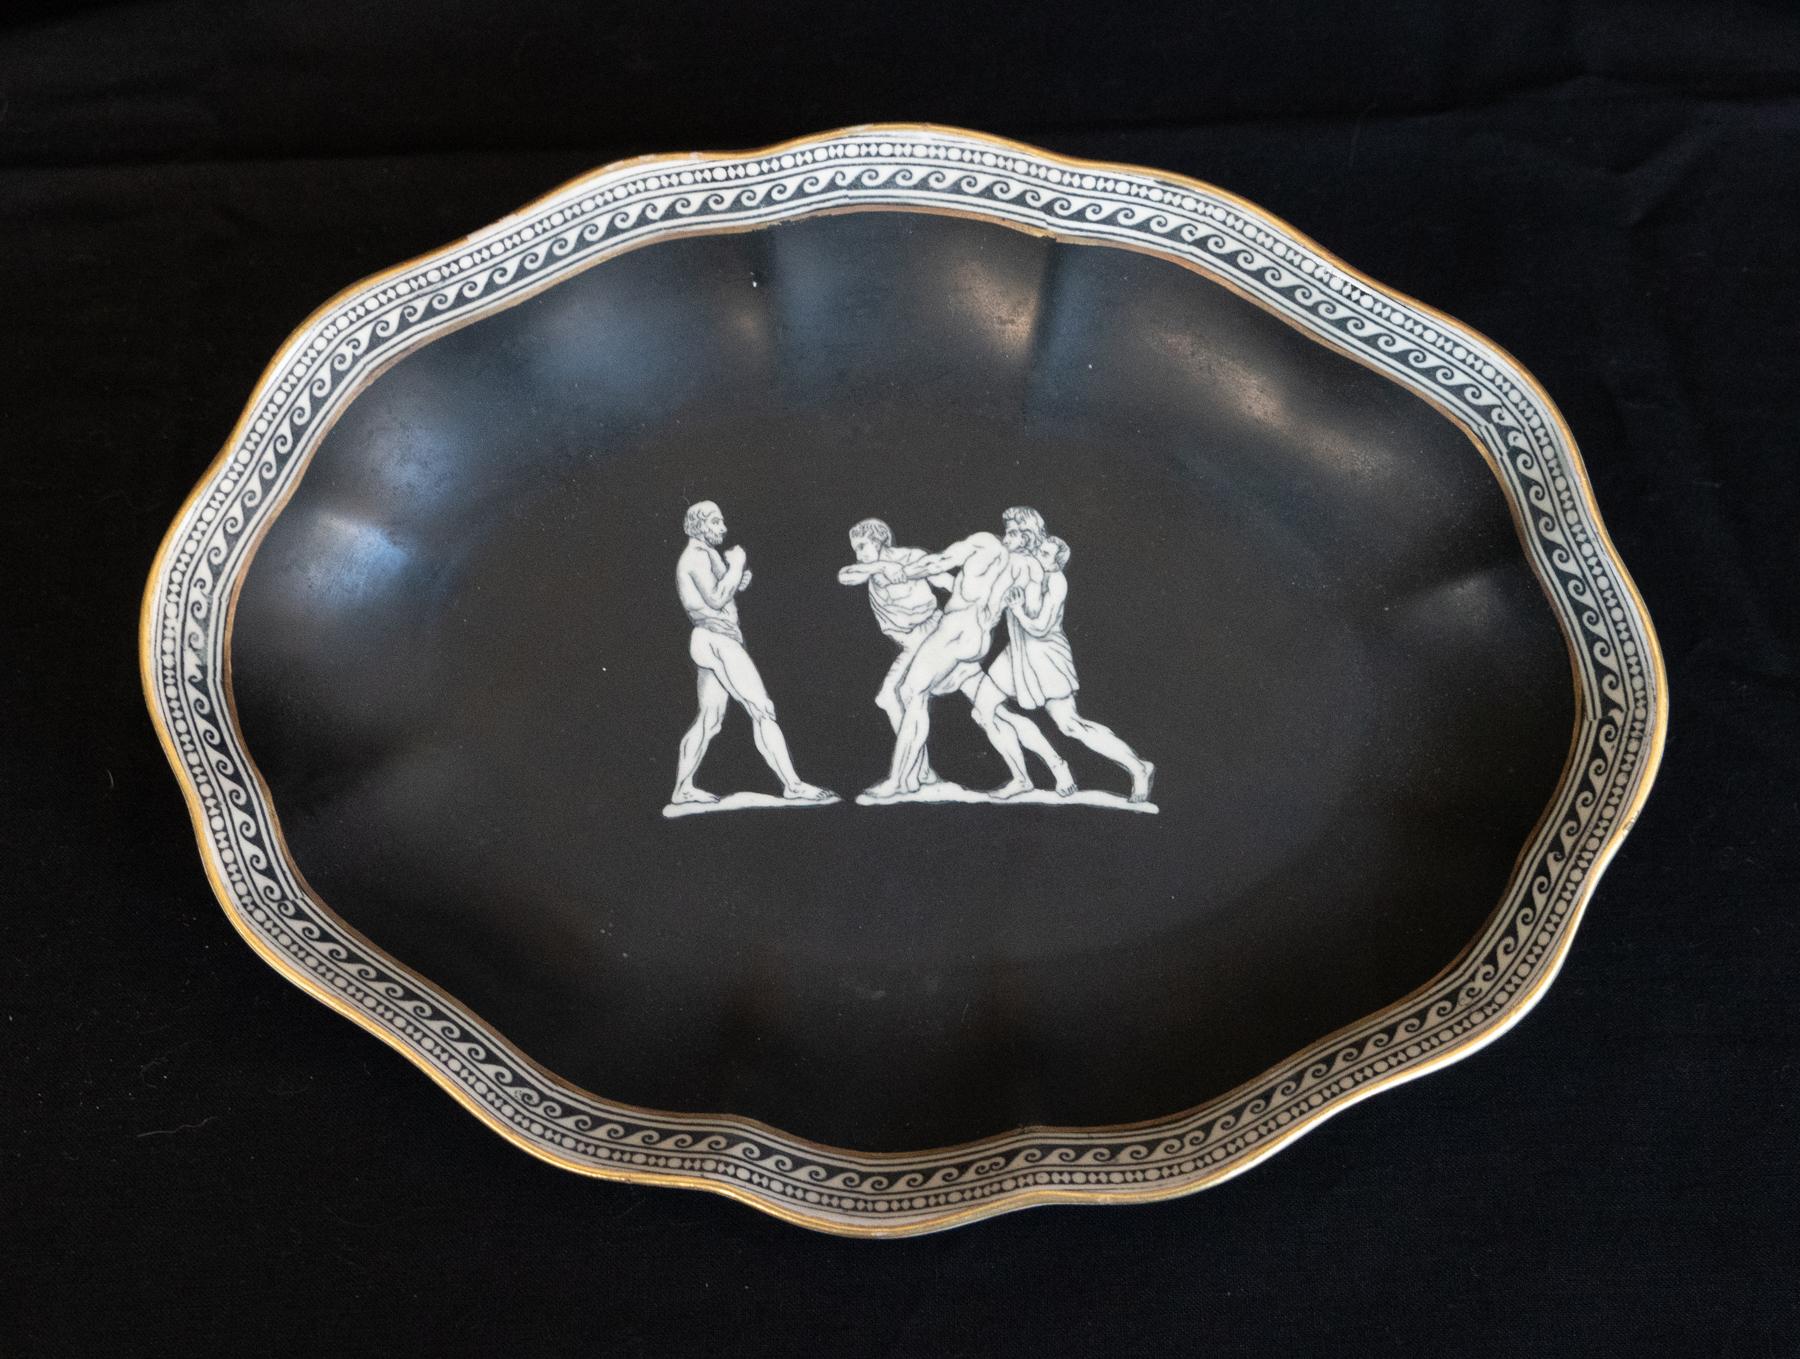 Gold Leaf Early 20th C. English Foilate Oval Form Plate with Classic Greco Roman Wrestlers For Sale